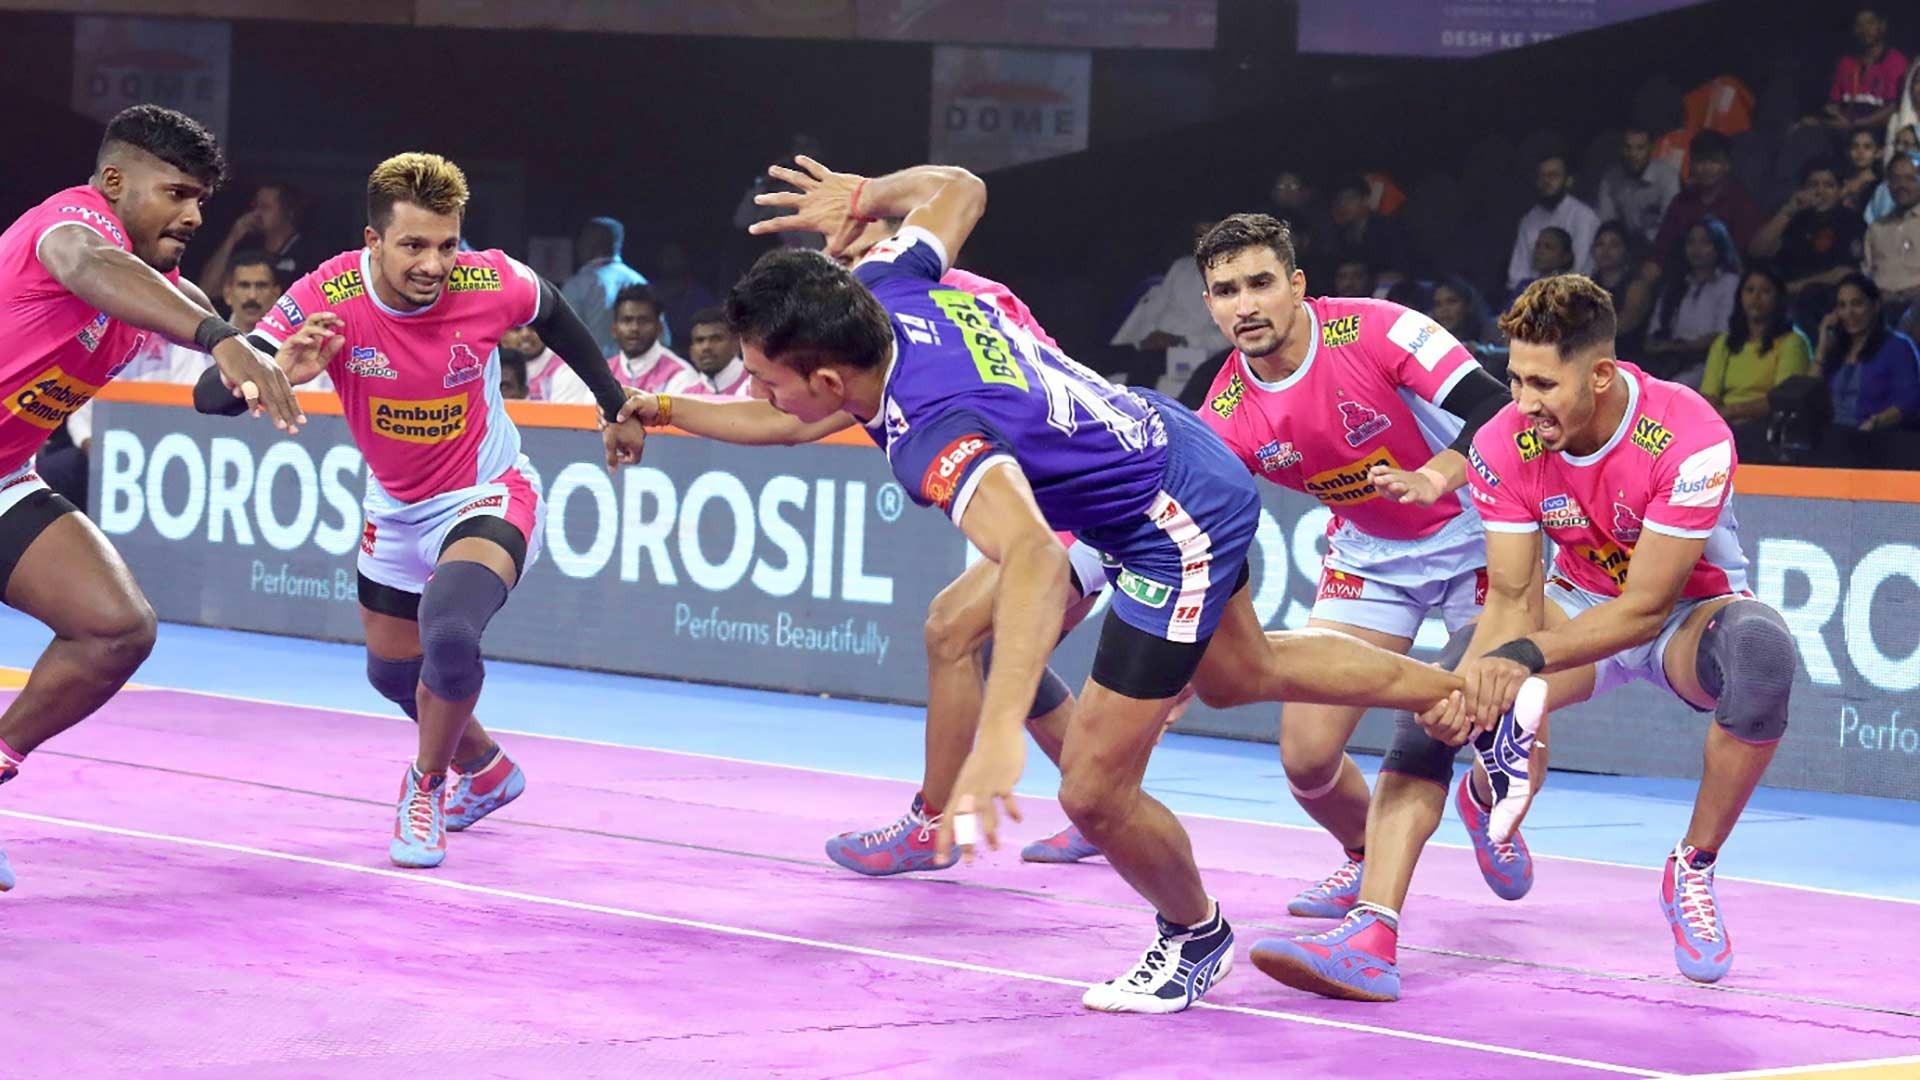 PKL 2019 | Proud of the way we came back after the early setback, says Srinivas Reddy